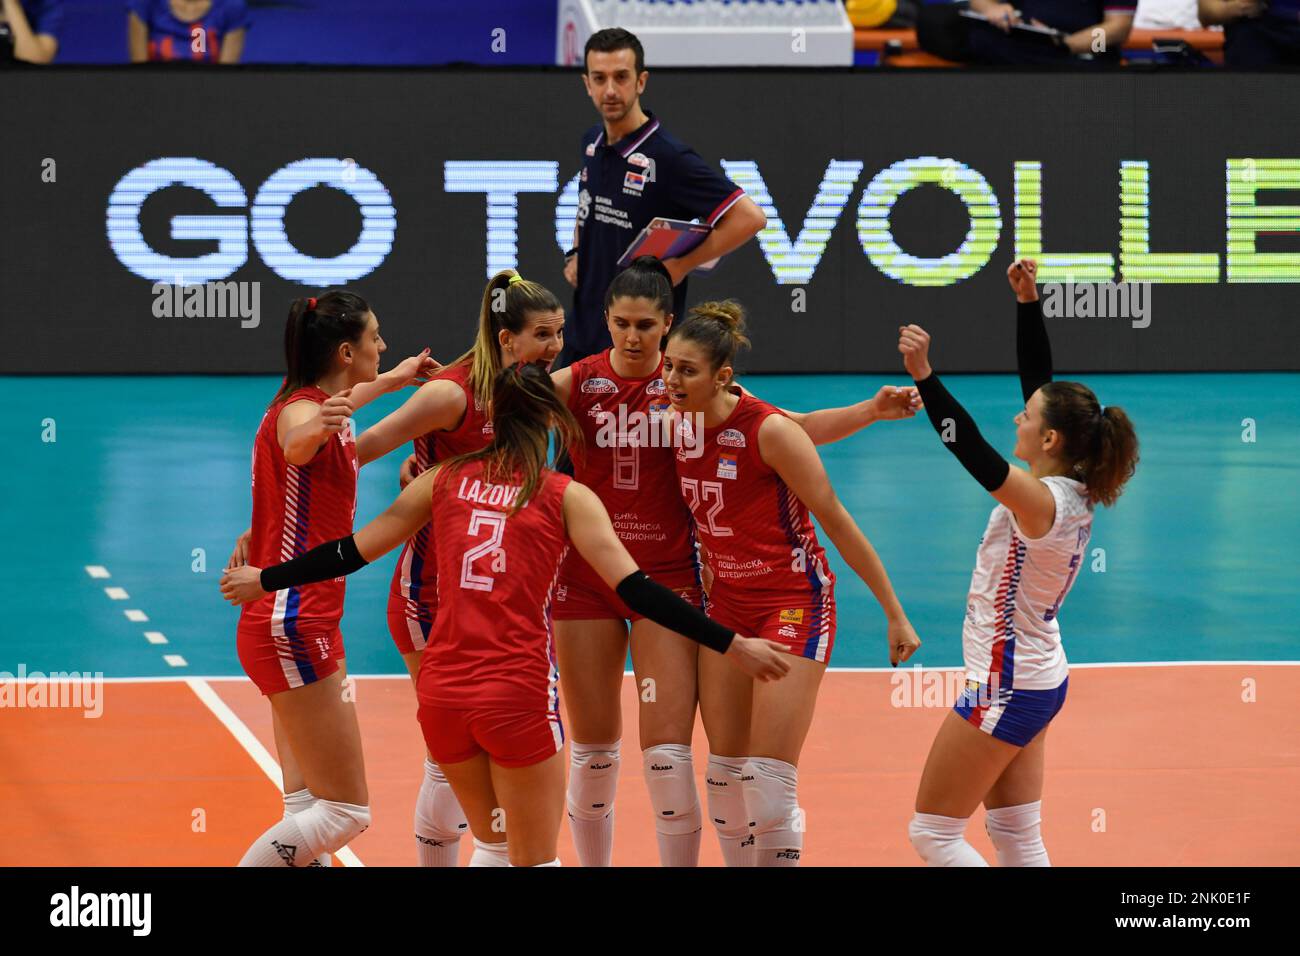 DF - Brasilia - 06/14/2022 - NATIONS WOMENS VOLLEYBALL LEAGUE SERBIA X ITALY